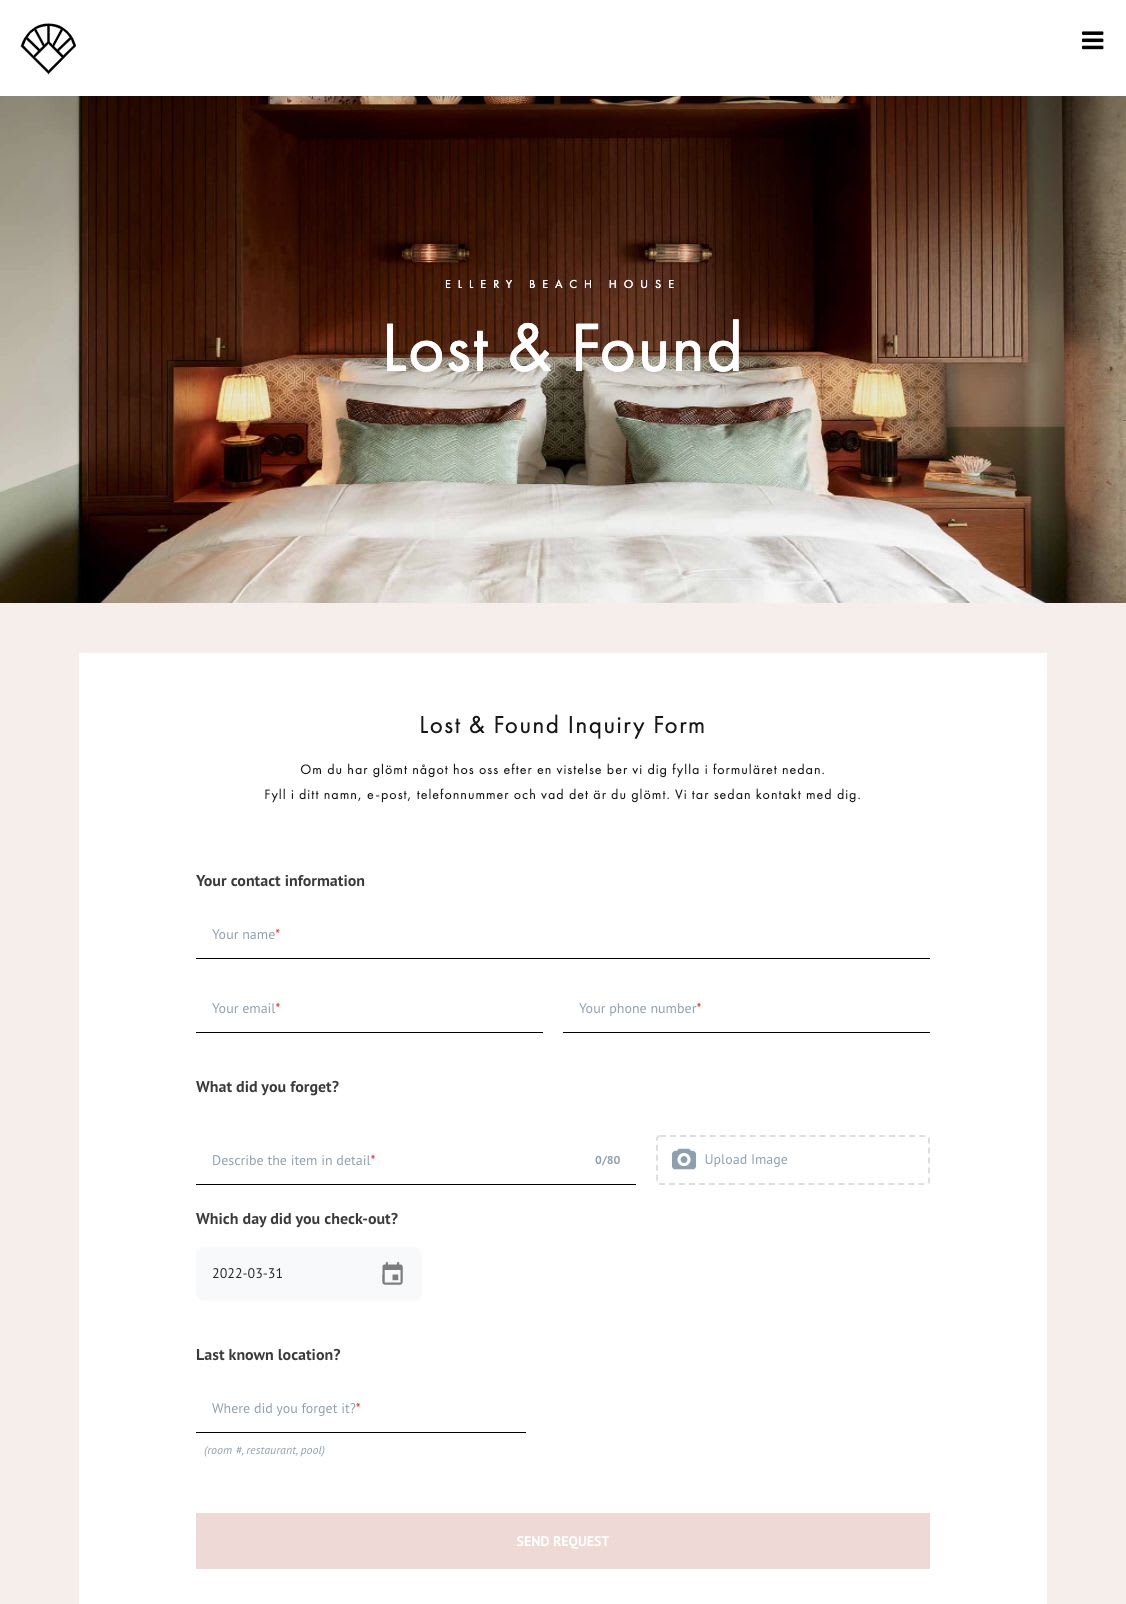 Ellery Beach House: increase guest experience after checkout